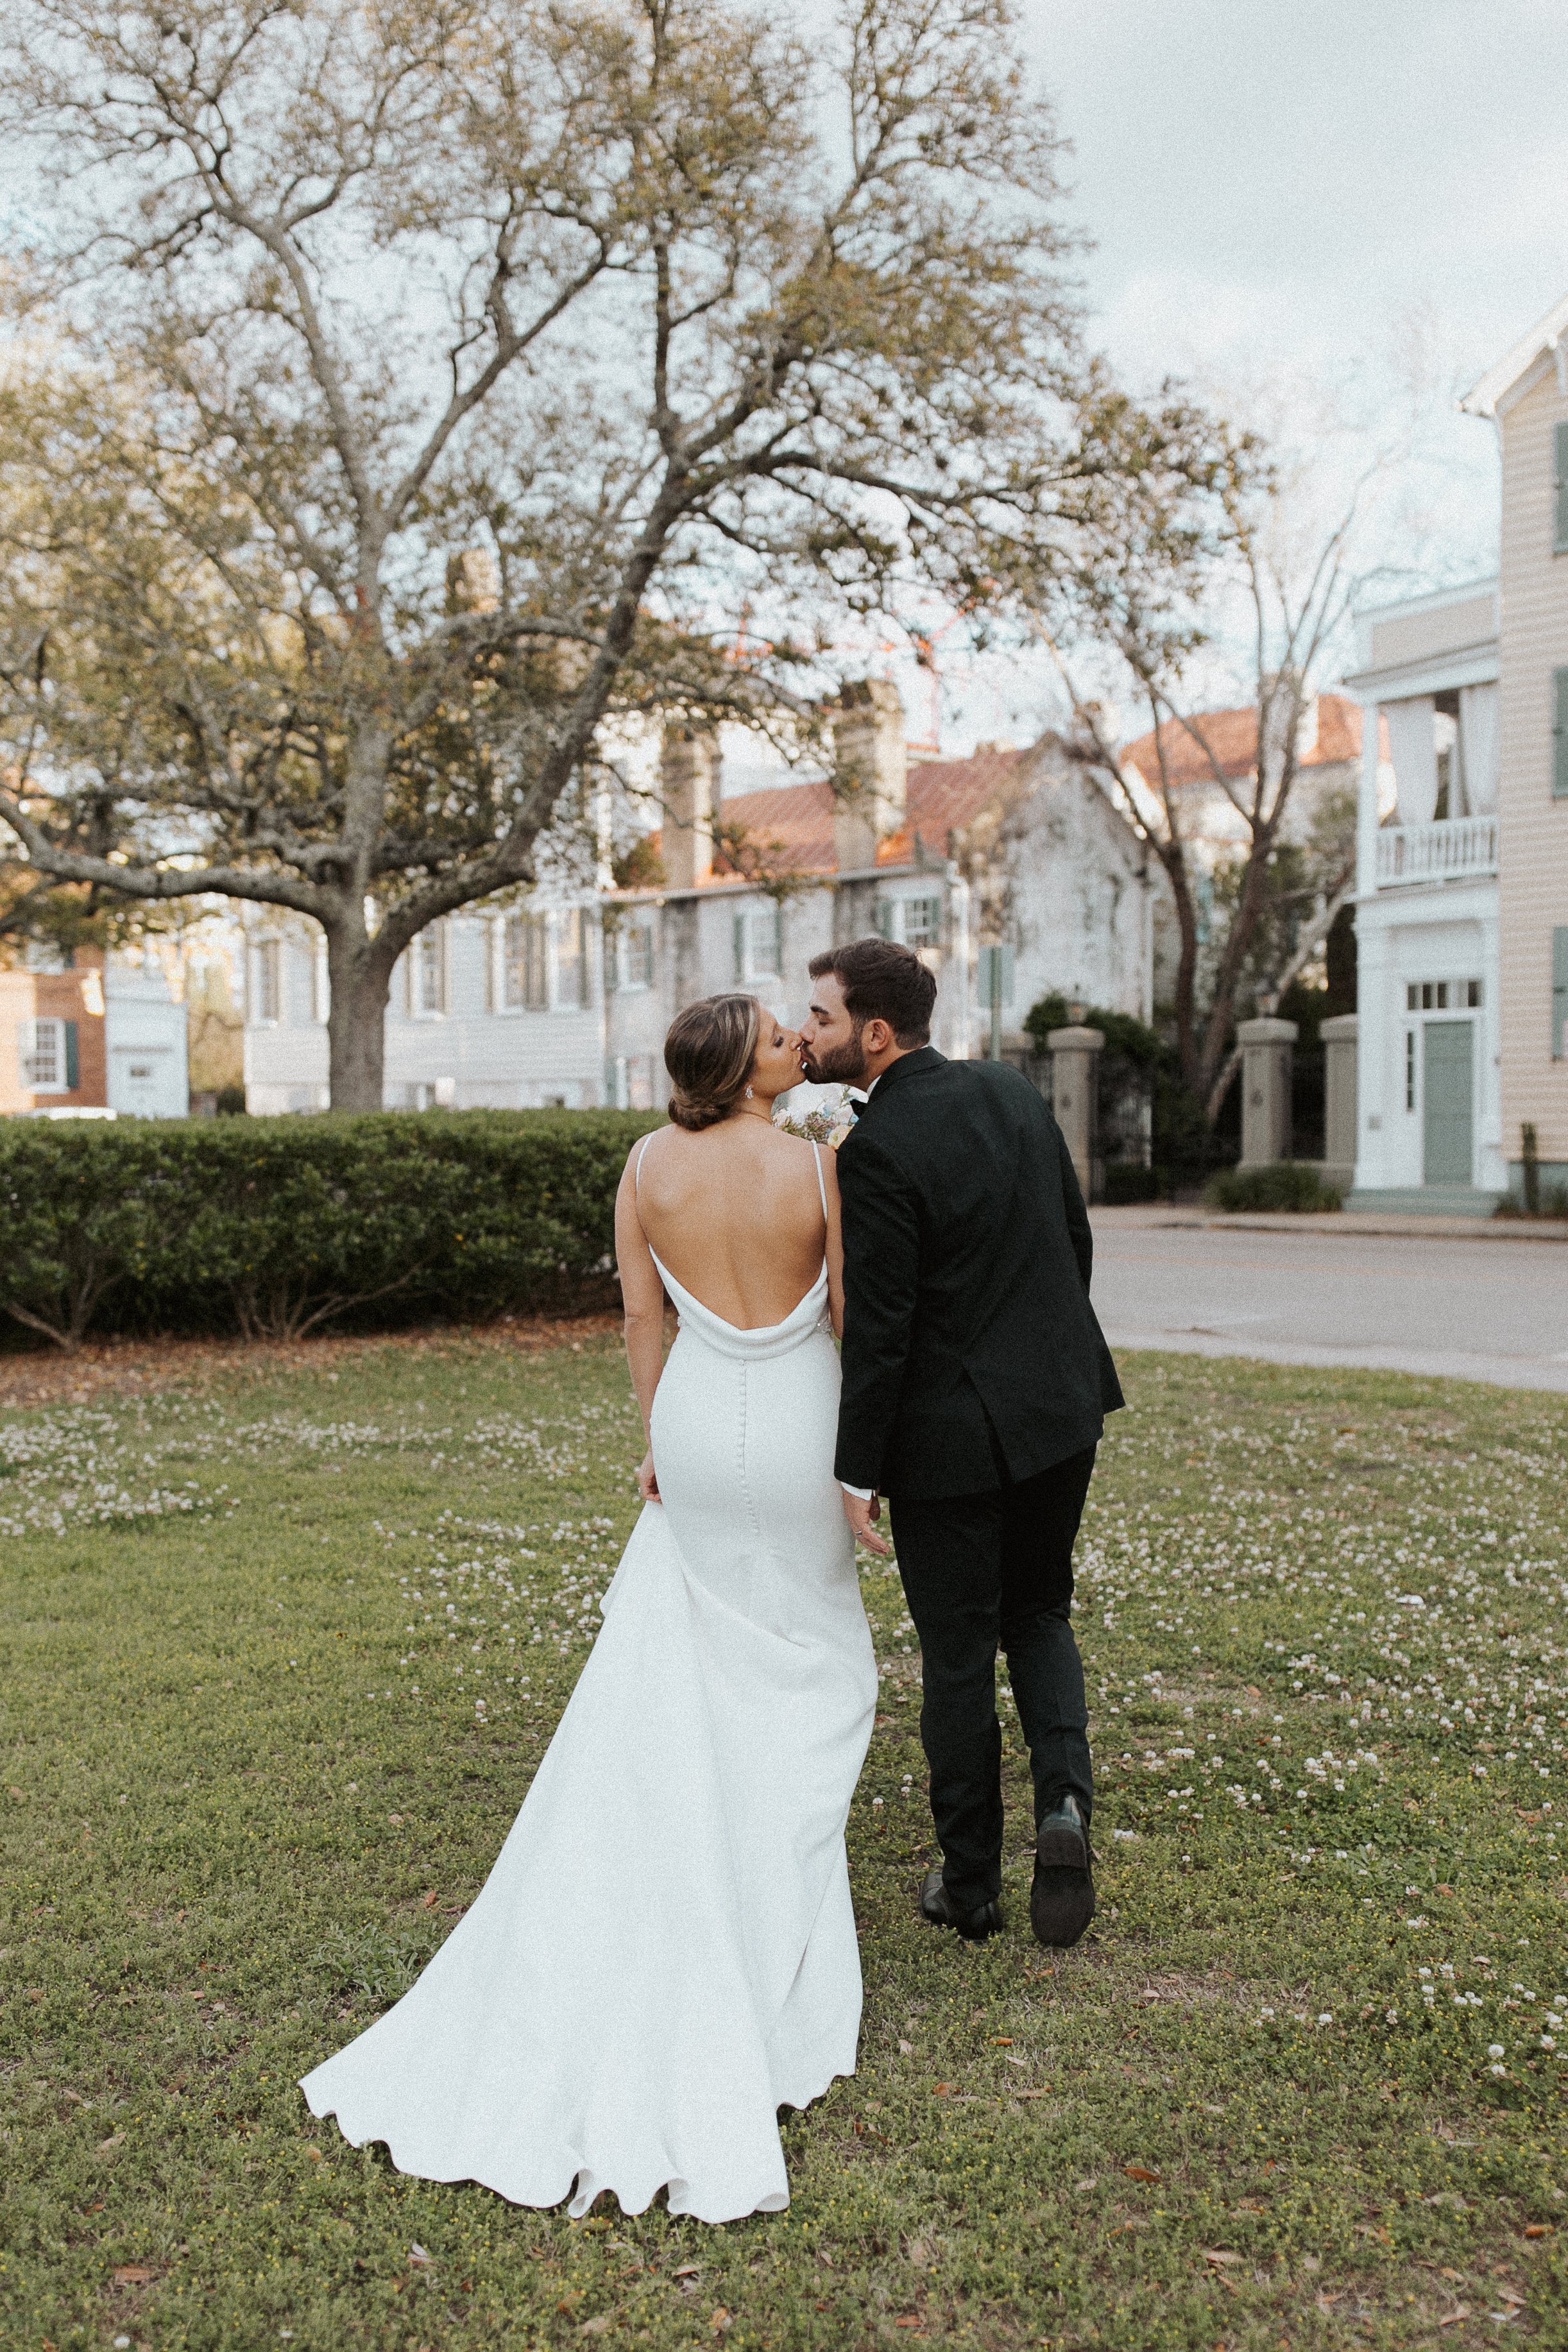 ivory-and-beau-blog-wedding-blog-down-for-the-gown-gracie-real-bride-archie-made-with-love-bridal-wedding-dress-savannah-bridal-shop-savannah-bridal-boutique-savannah-georgia-DonnieGracieESP-527.jpg